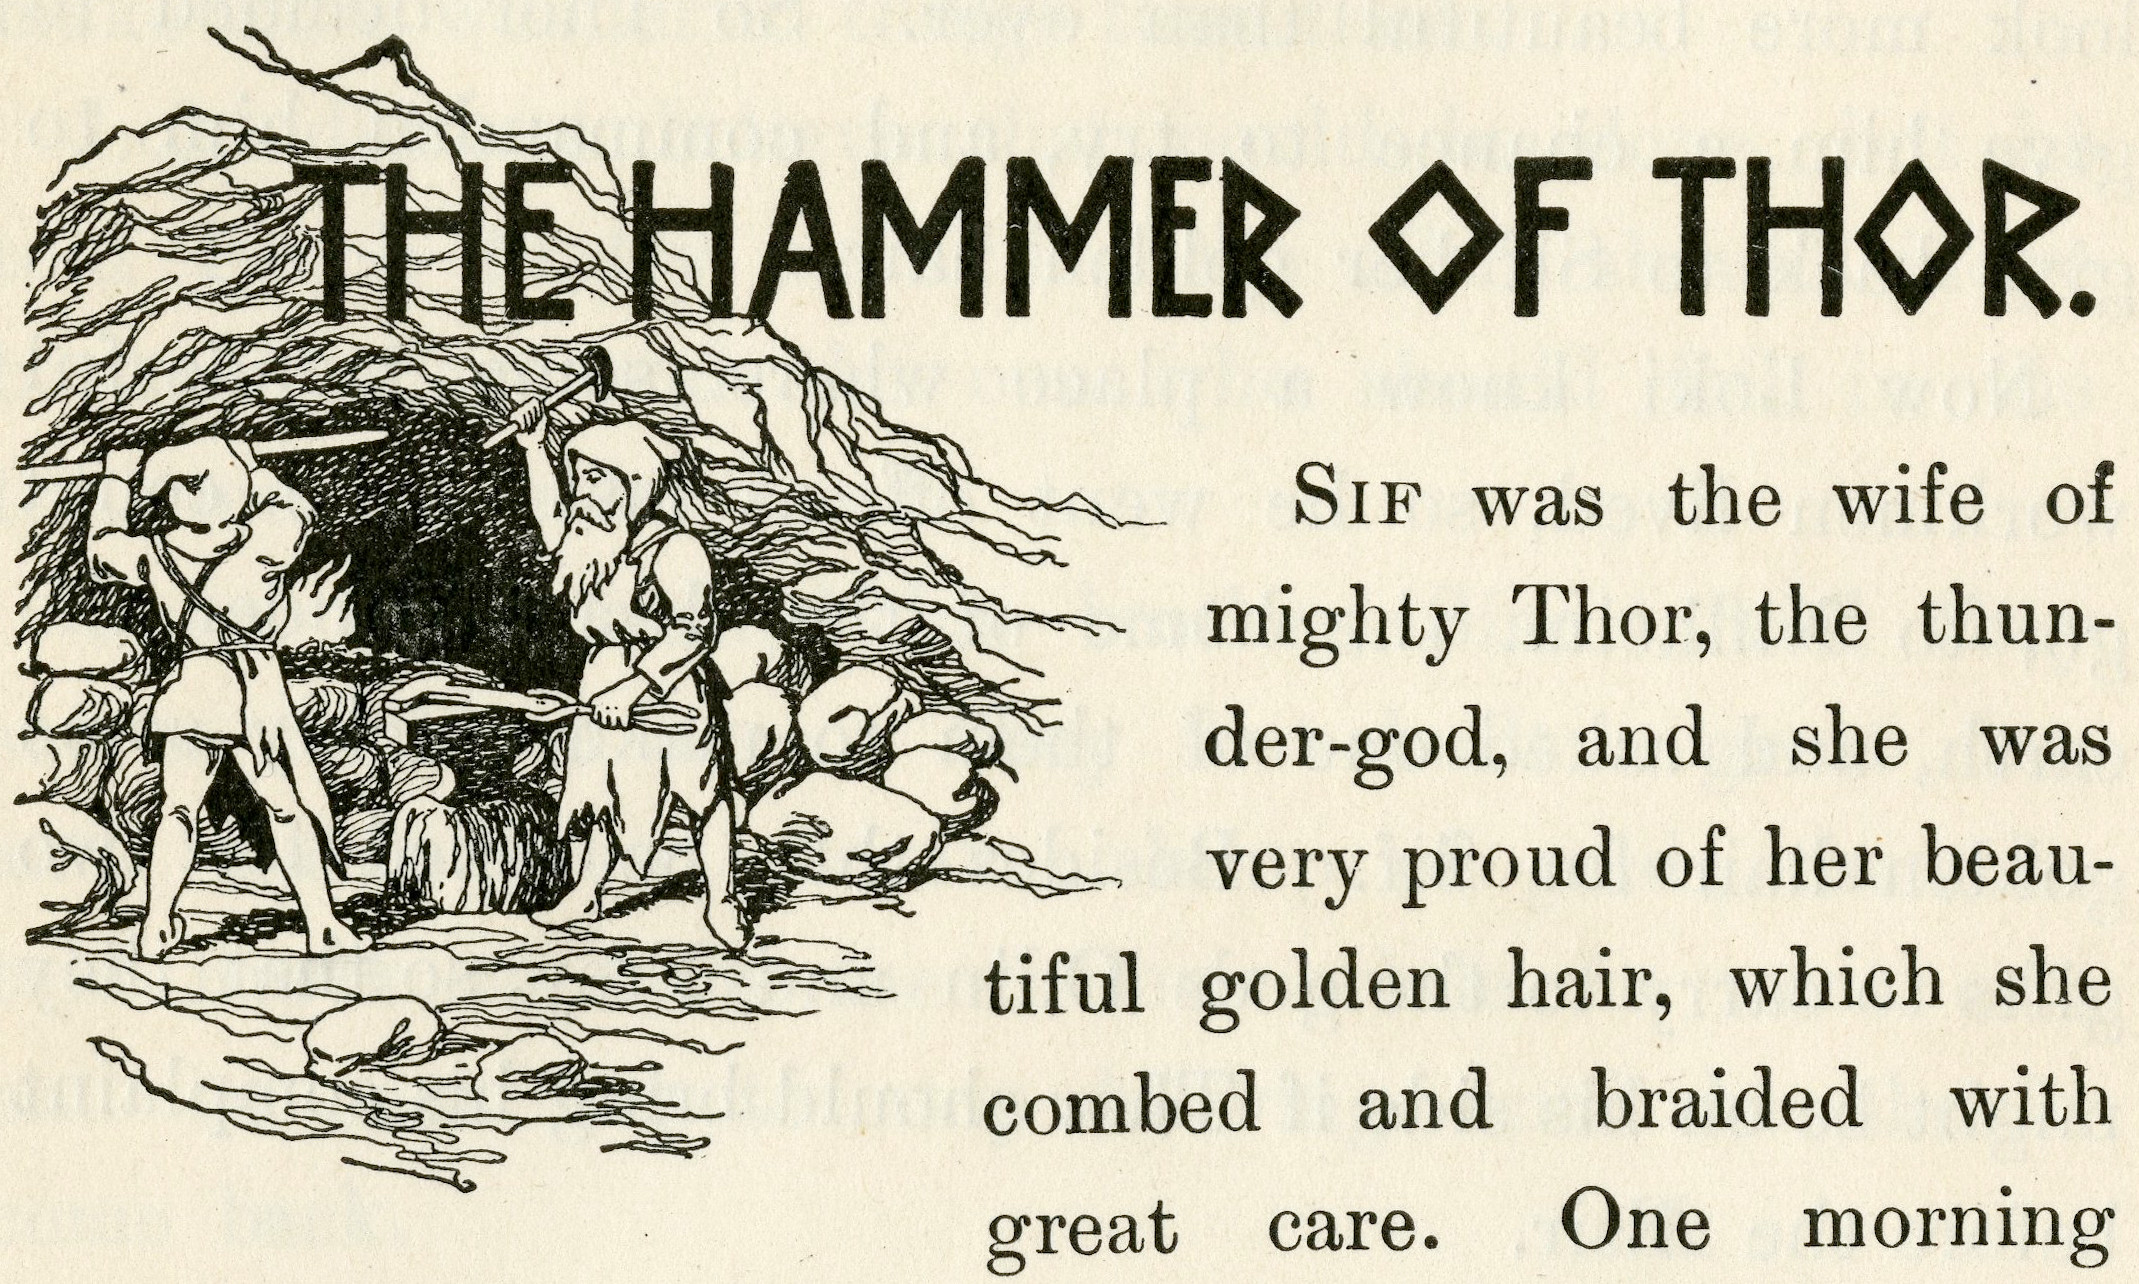 Illustrated Title Header for "The Hammer of
                                Thor"